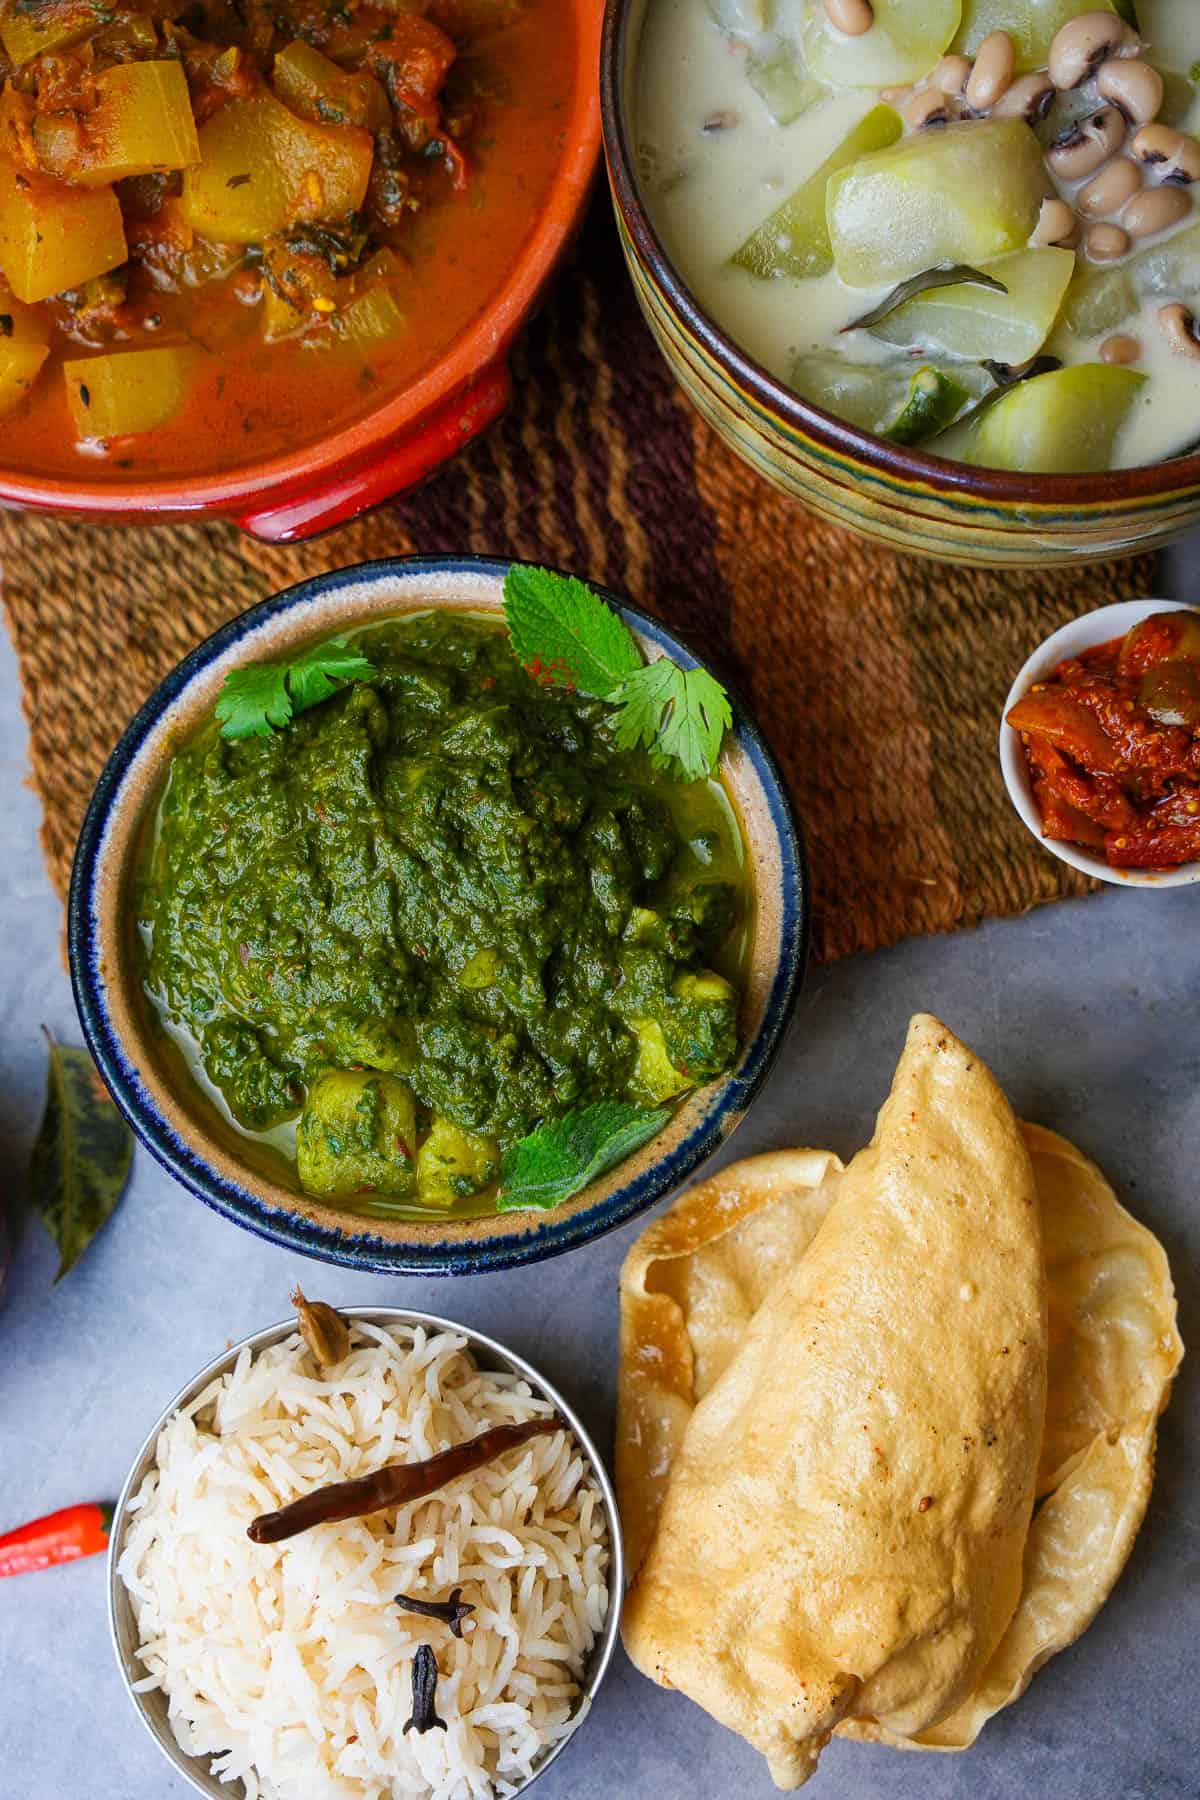 Saag aloo garnished with cilantro and mint leaves served alongside papad, basmati rice, pickle and sabjis.